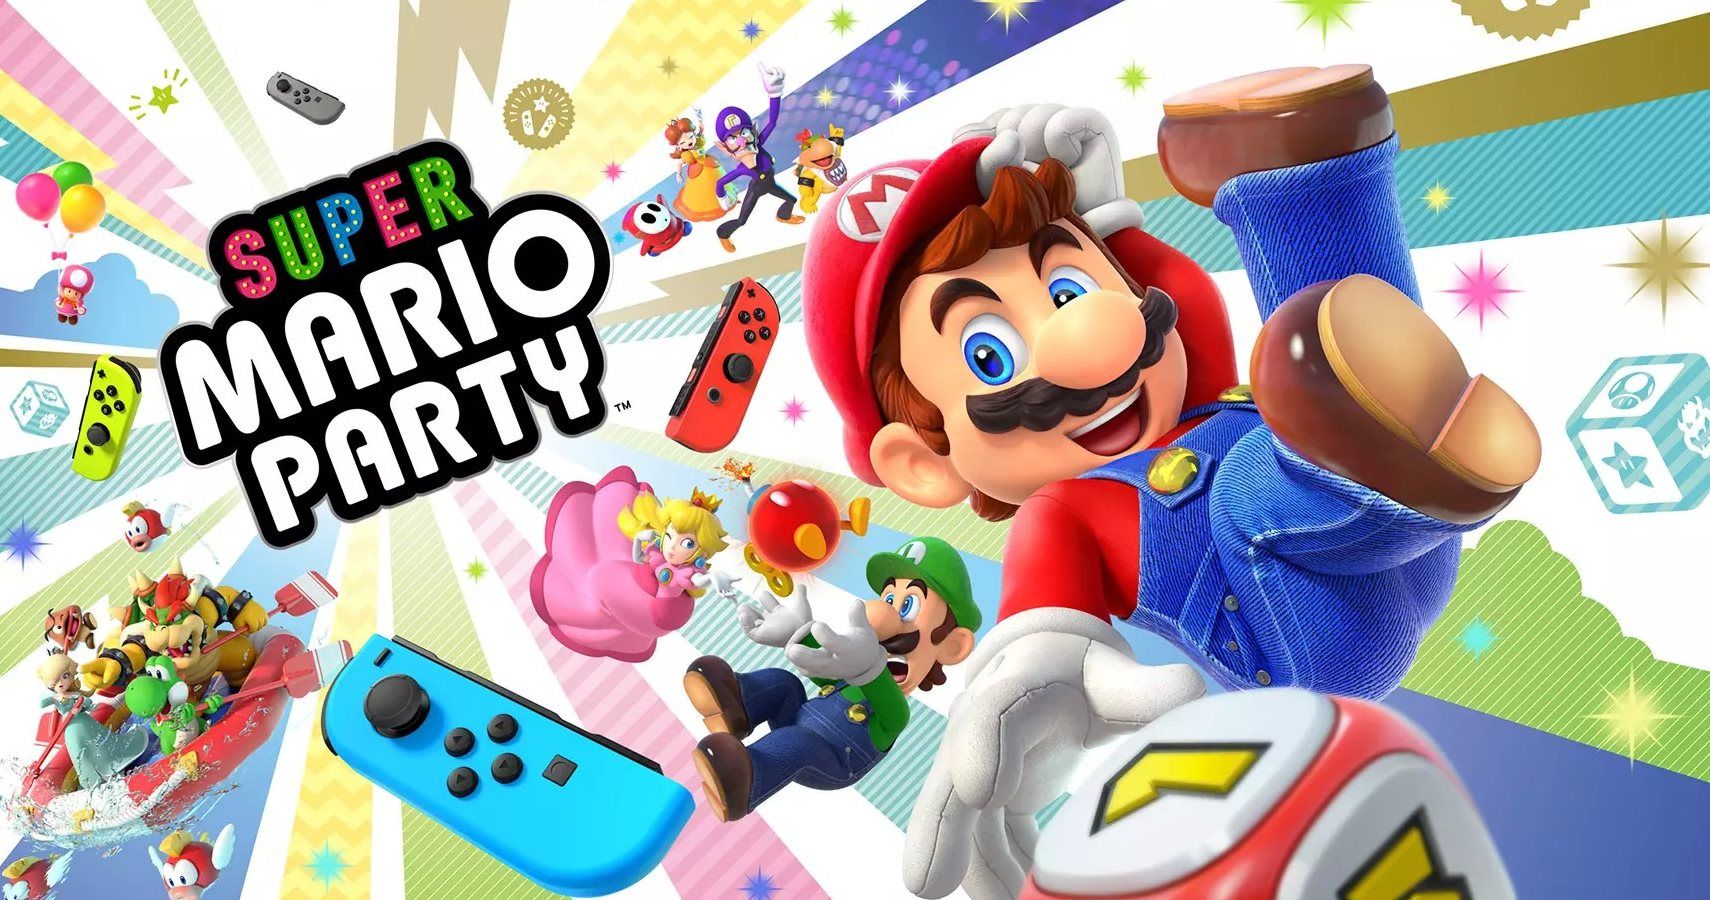 Super Mario Party Copy Sold For $7,100 On EBay 10 Days Before Release